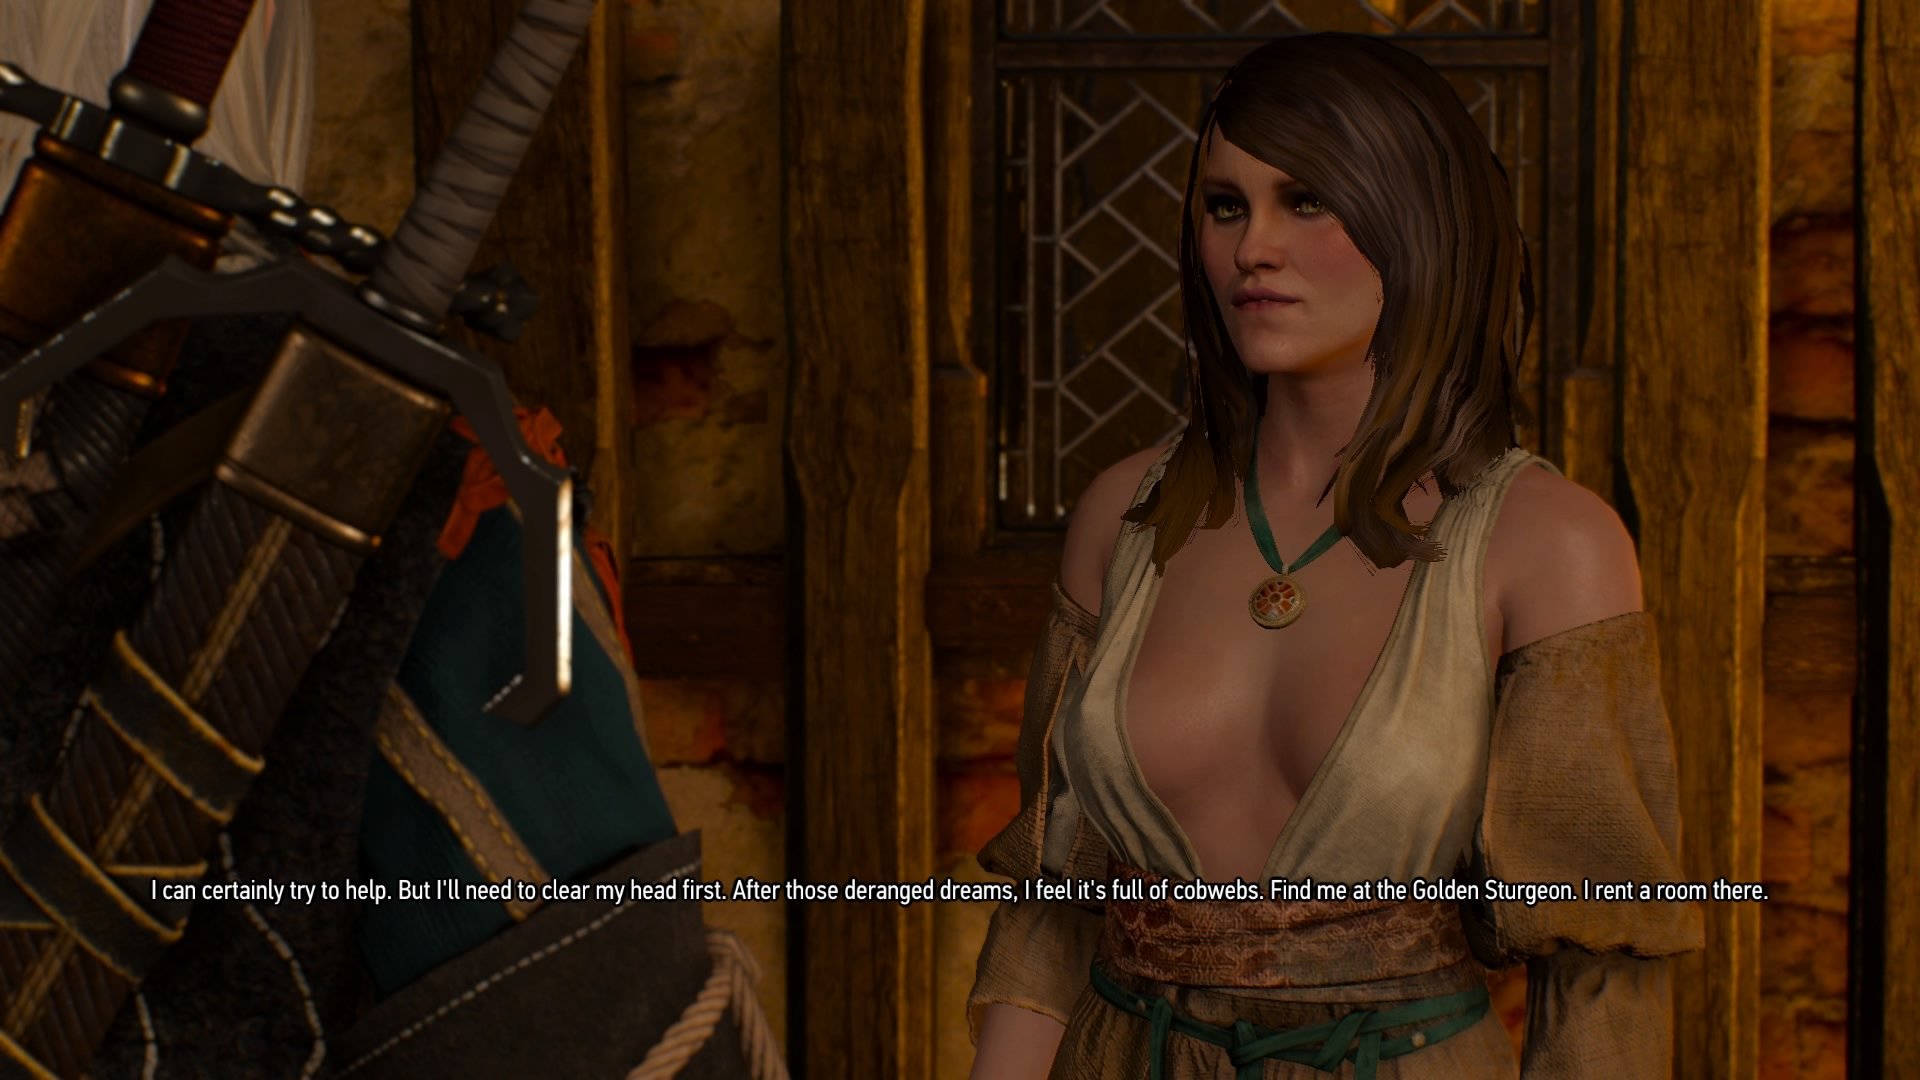 Corinne Tilly is one of many secondary female characters who suffer from “hot boob disease” in The Witcher universe.